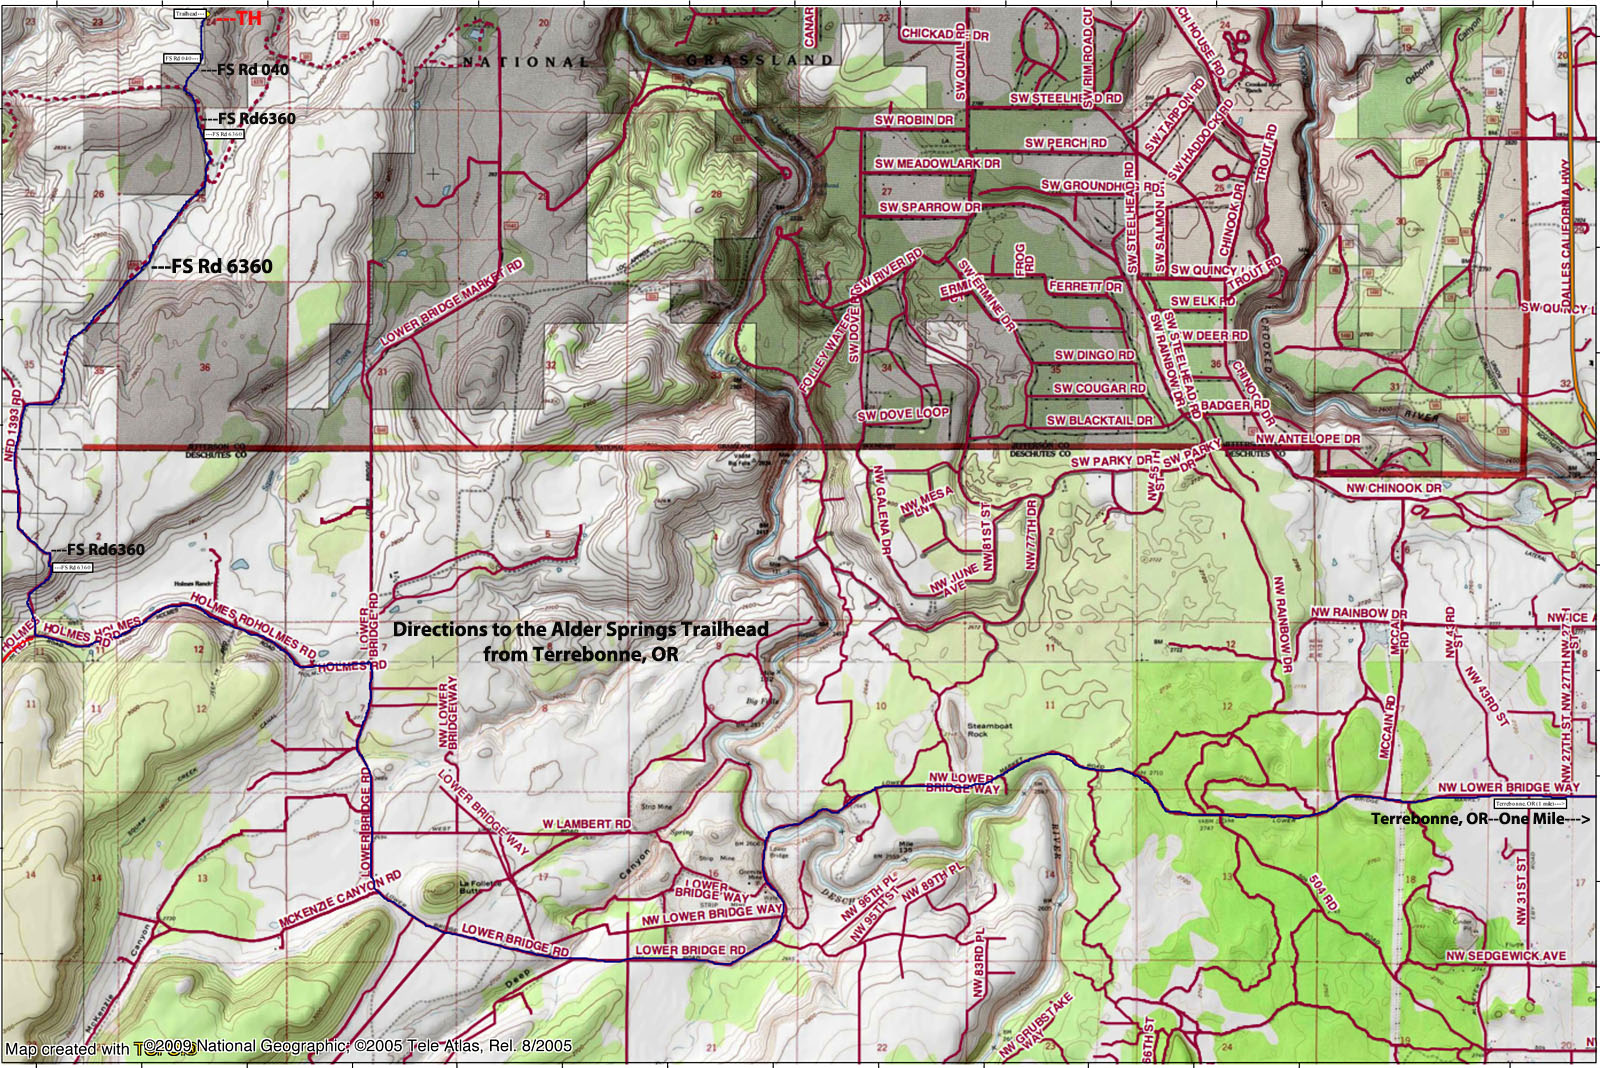 Map - Directions to the Alder Springs Trailhead from US 197 at Terrebonne, OR.